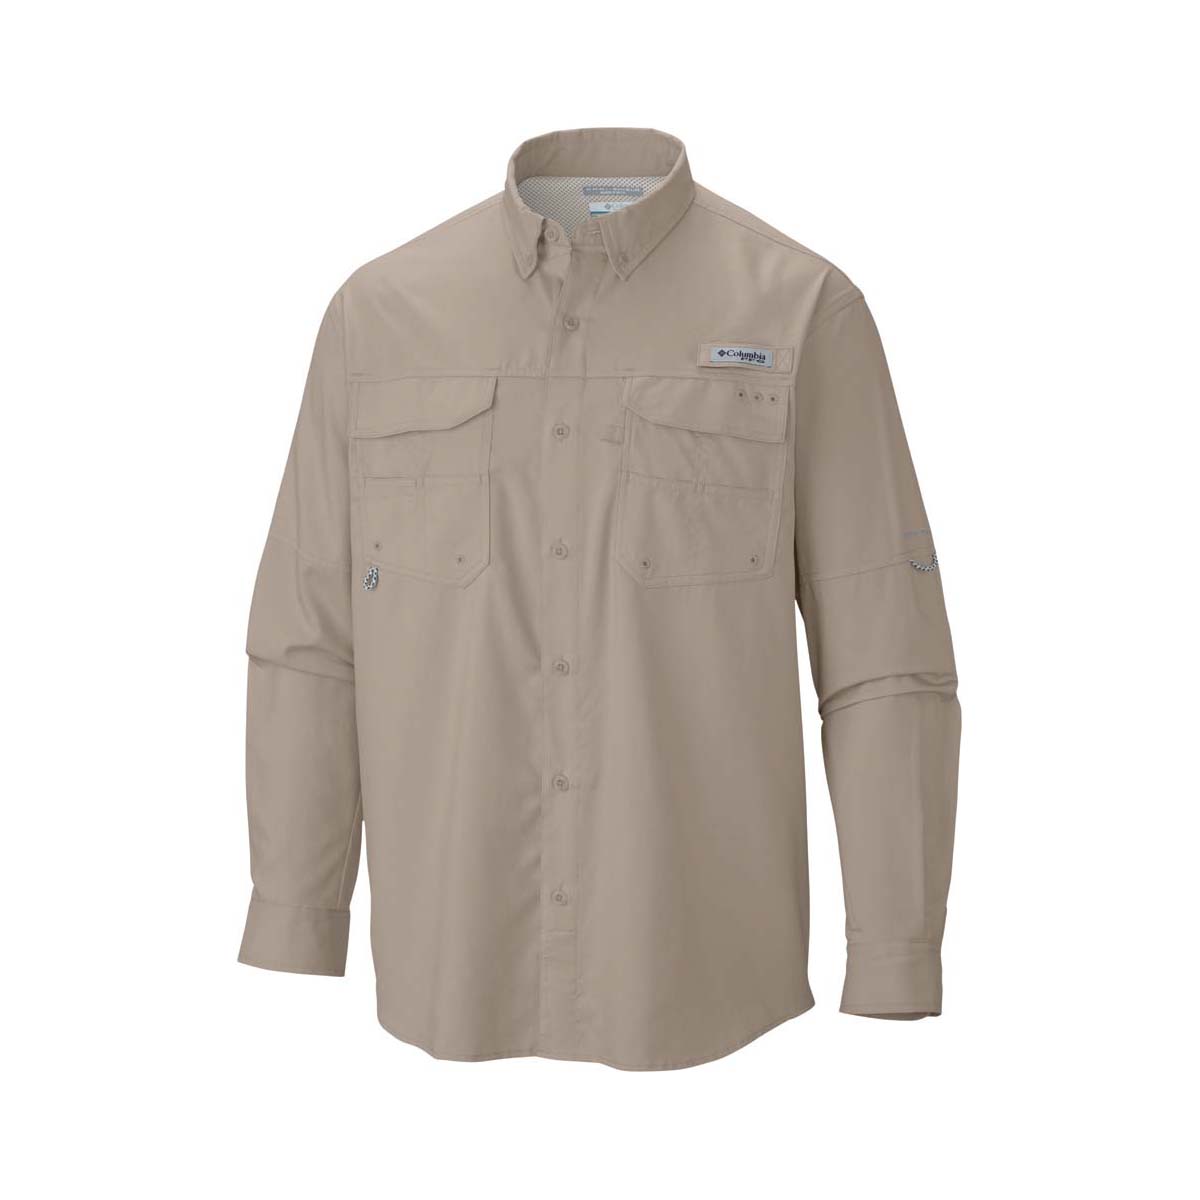 Columbia Men's Blood and Guts IV Long Sleeve Fishing Shirt Fossil L